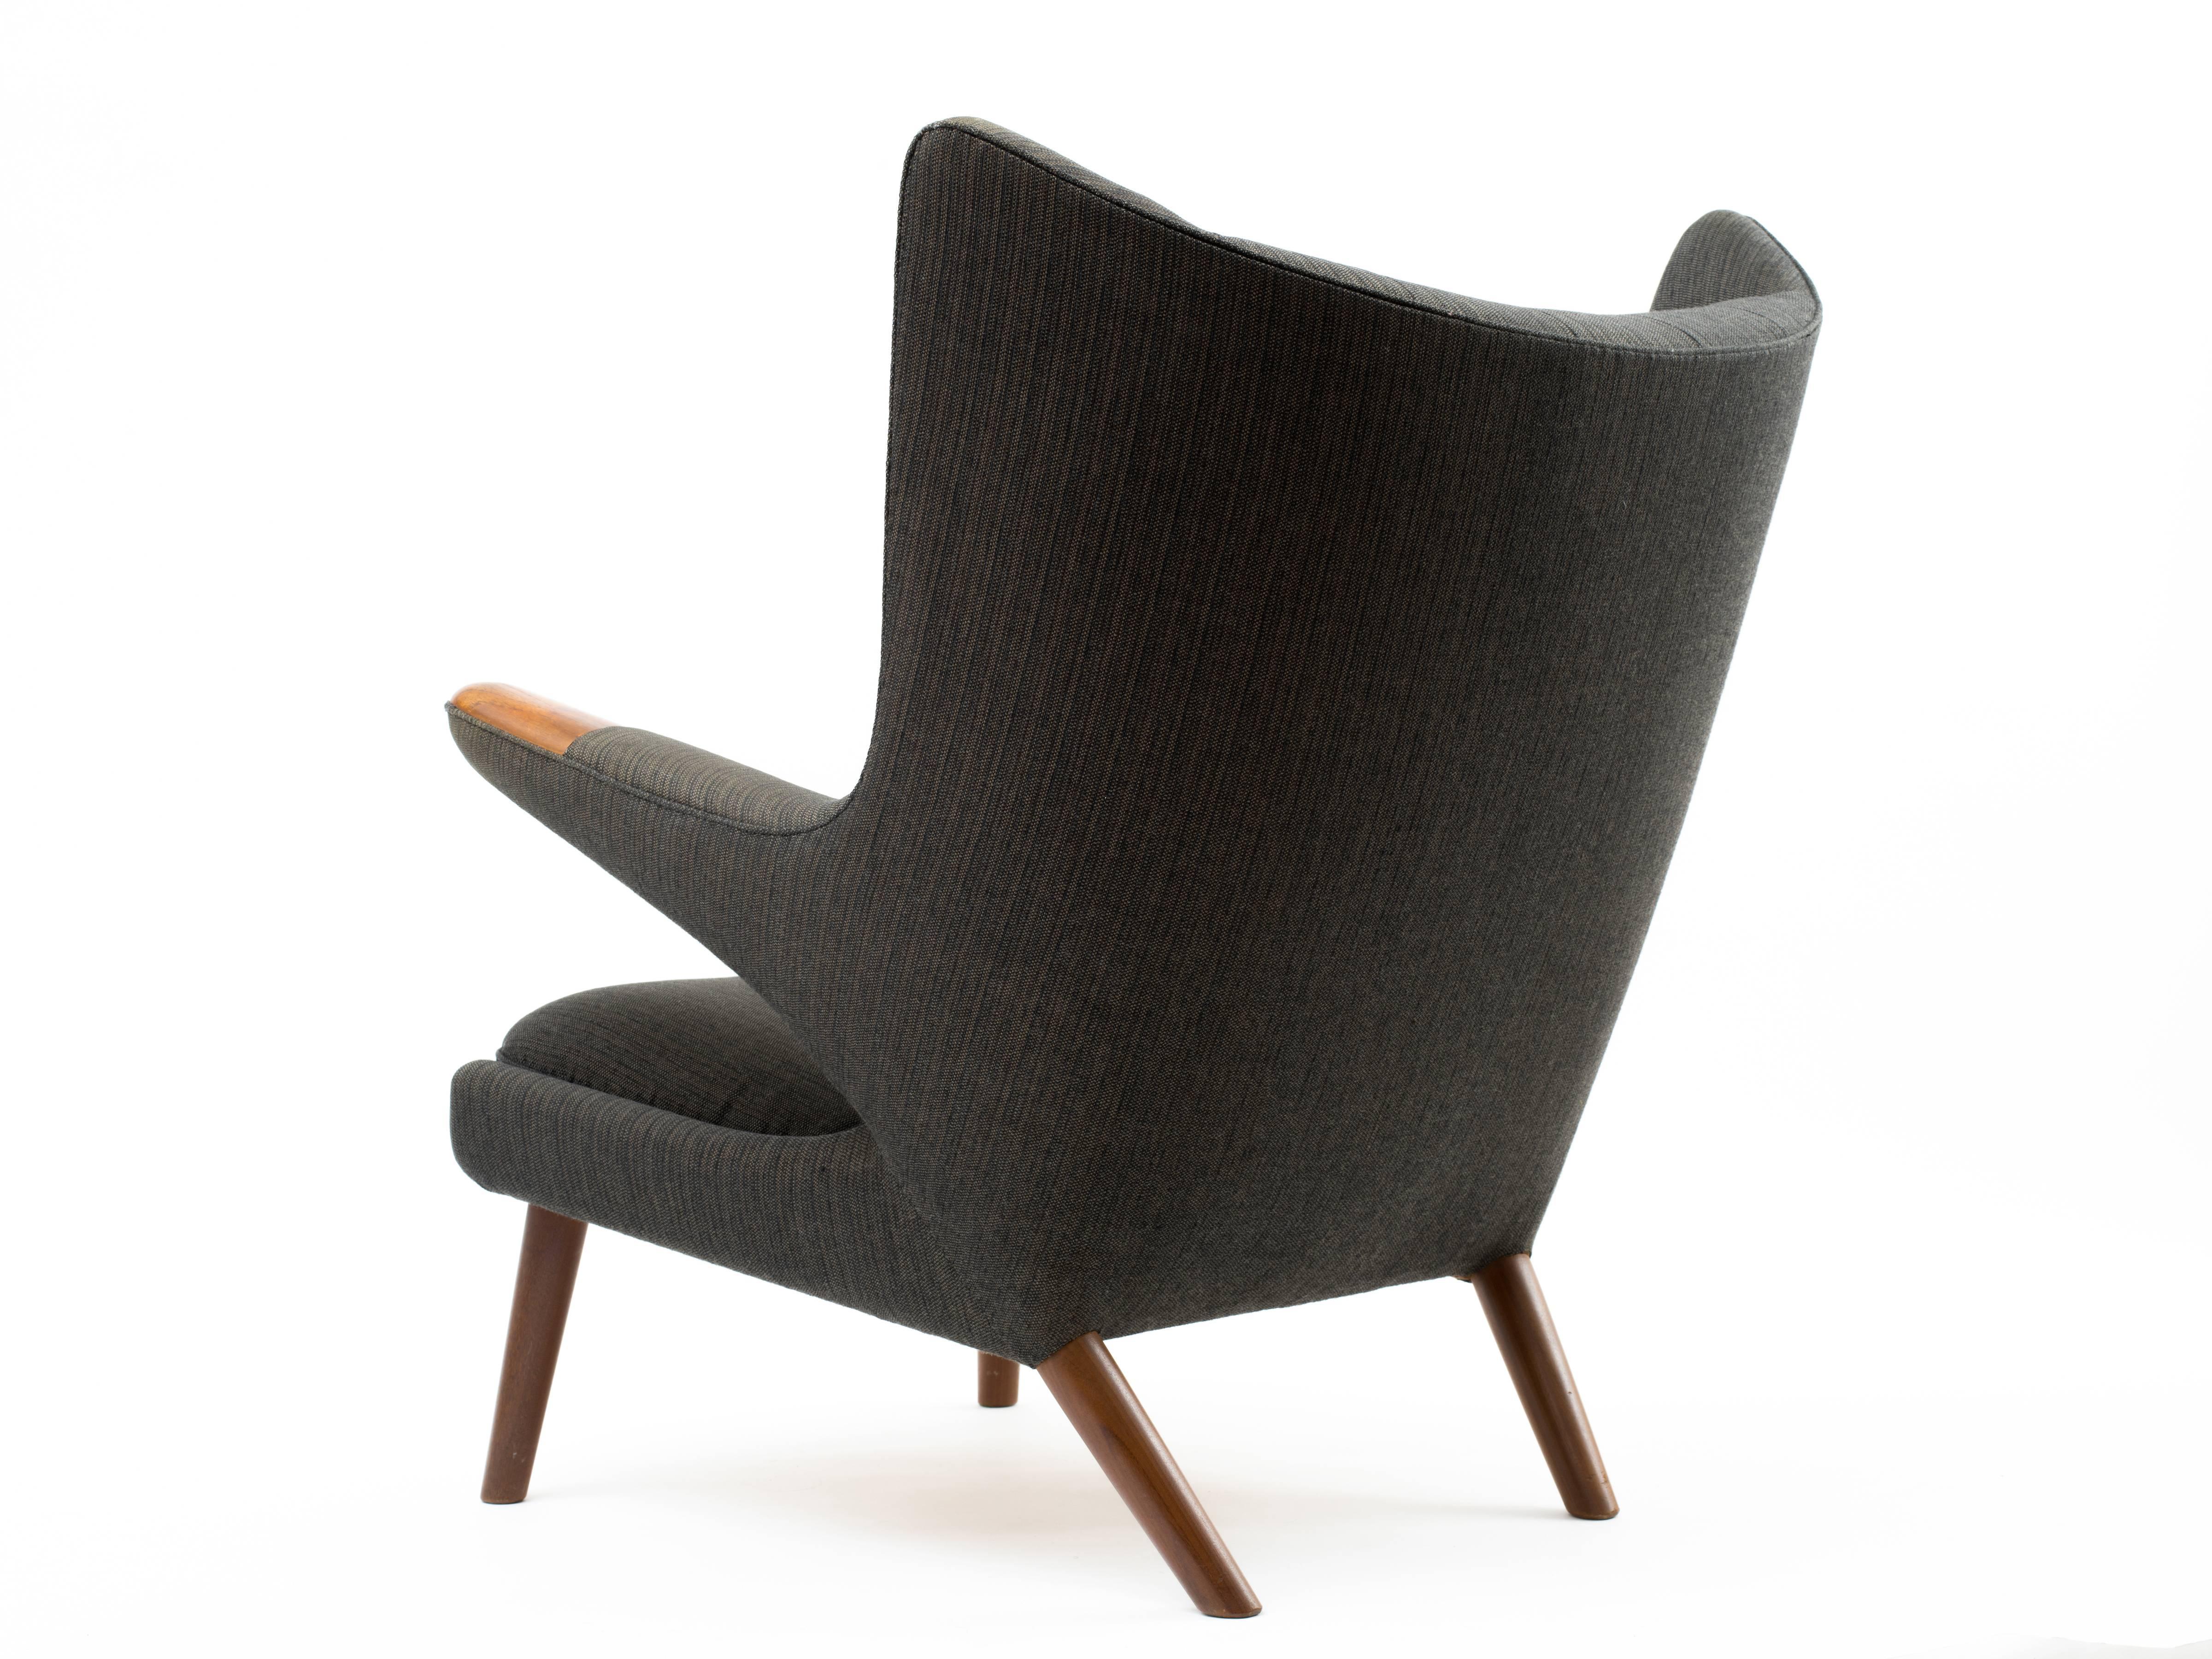 A Papa Bear chair, designed by Hans Wegner for AP Stolen in 1951. This example dates to circa 1959 and retains its original charcoal wool upholstery with one of the original extra backrest buttons still sewn behind the seat. Fabric has been expertly